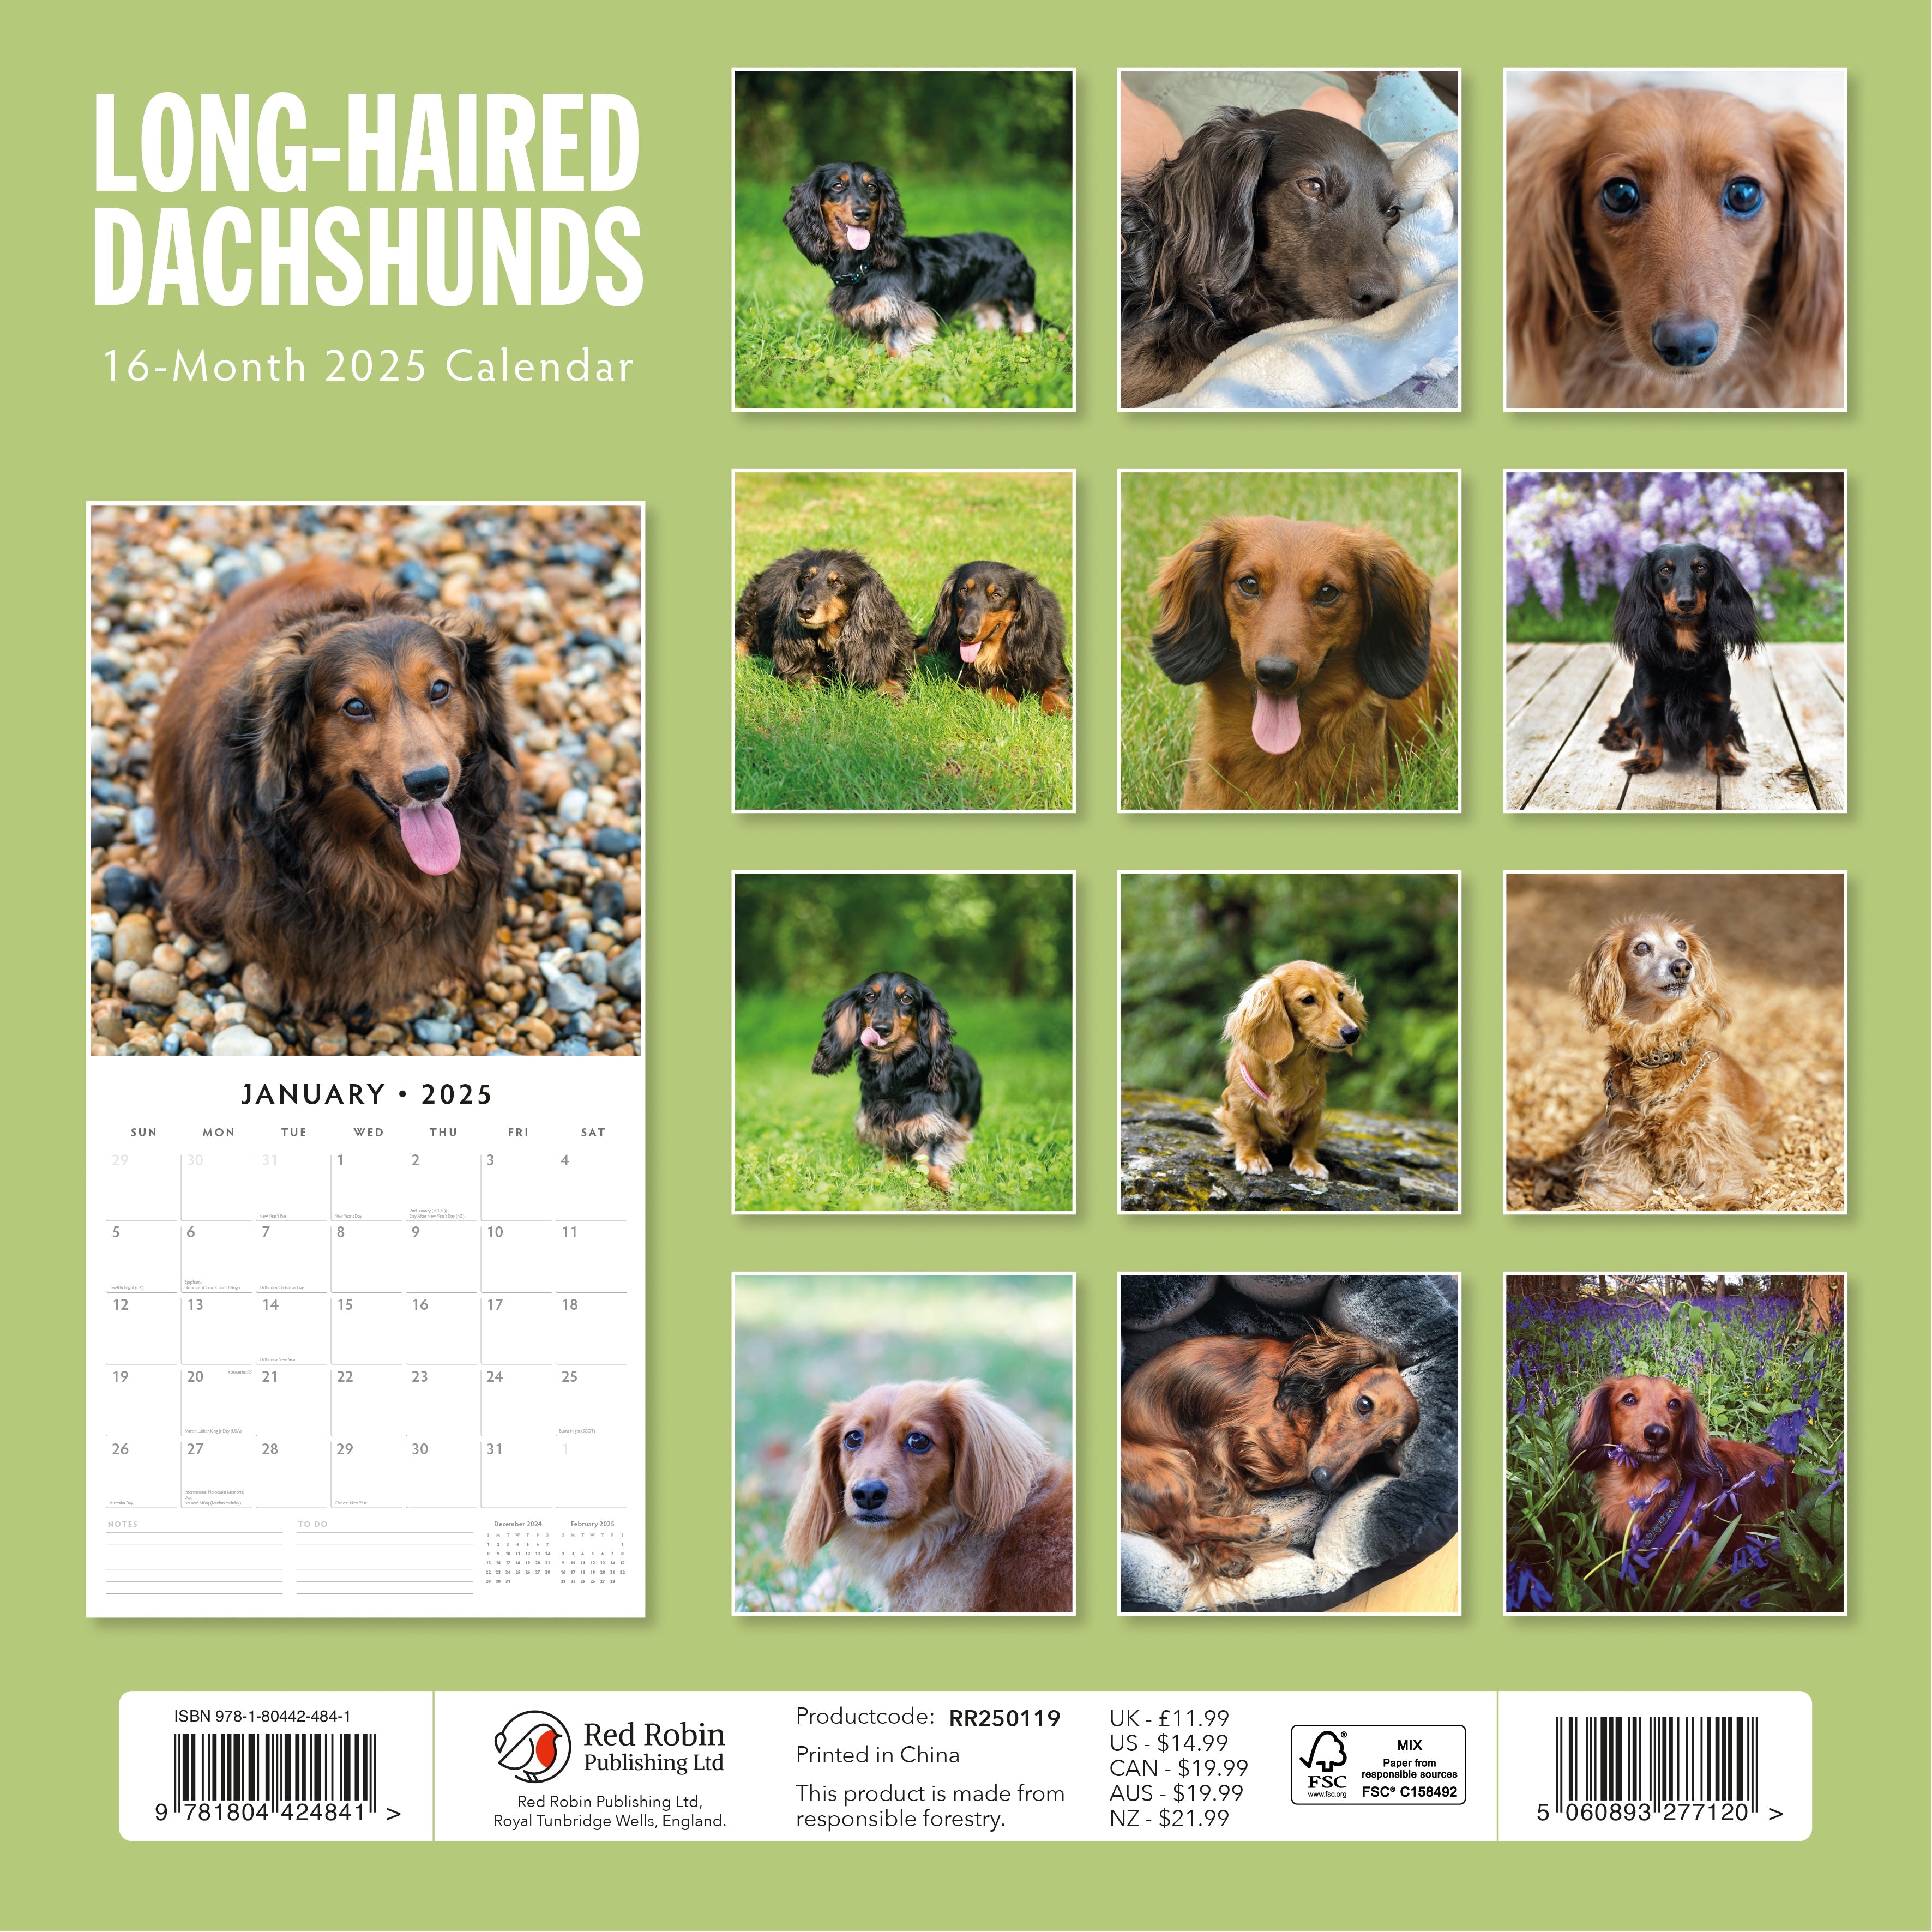 2025 Long-Haired Dachshunds - Square Wall Calendar